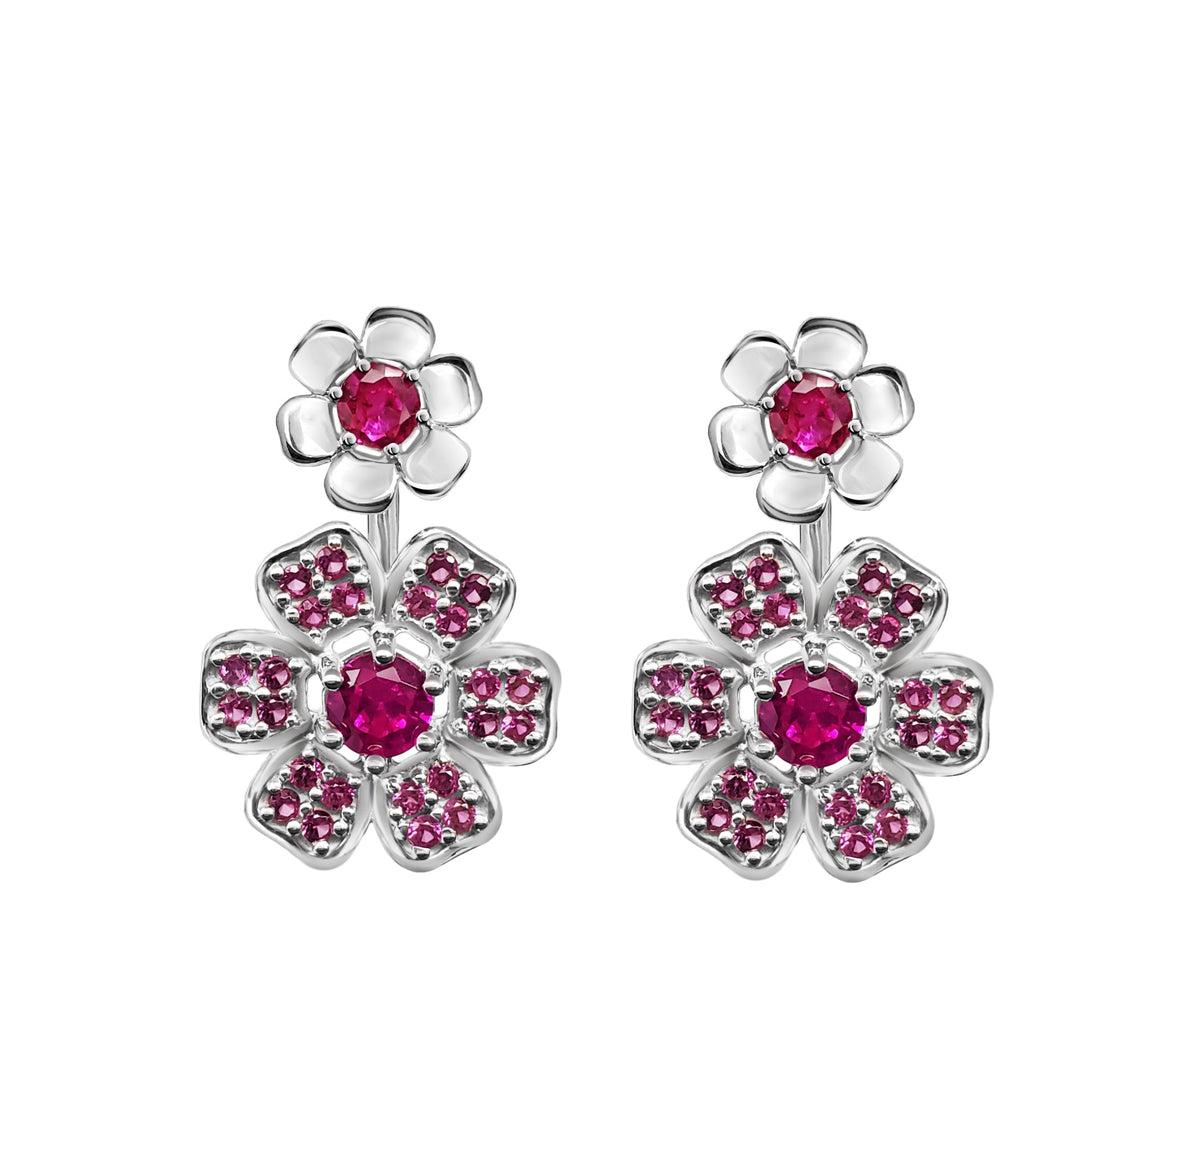 Earrings 925 Silver Women Florecer Flower Pink Crystals Anamora by Tanya Moss